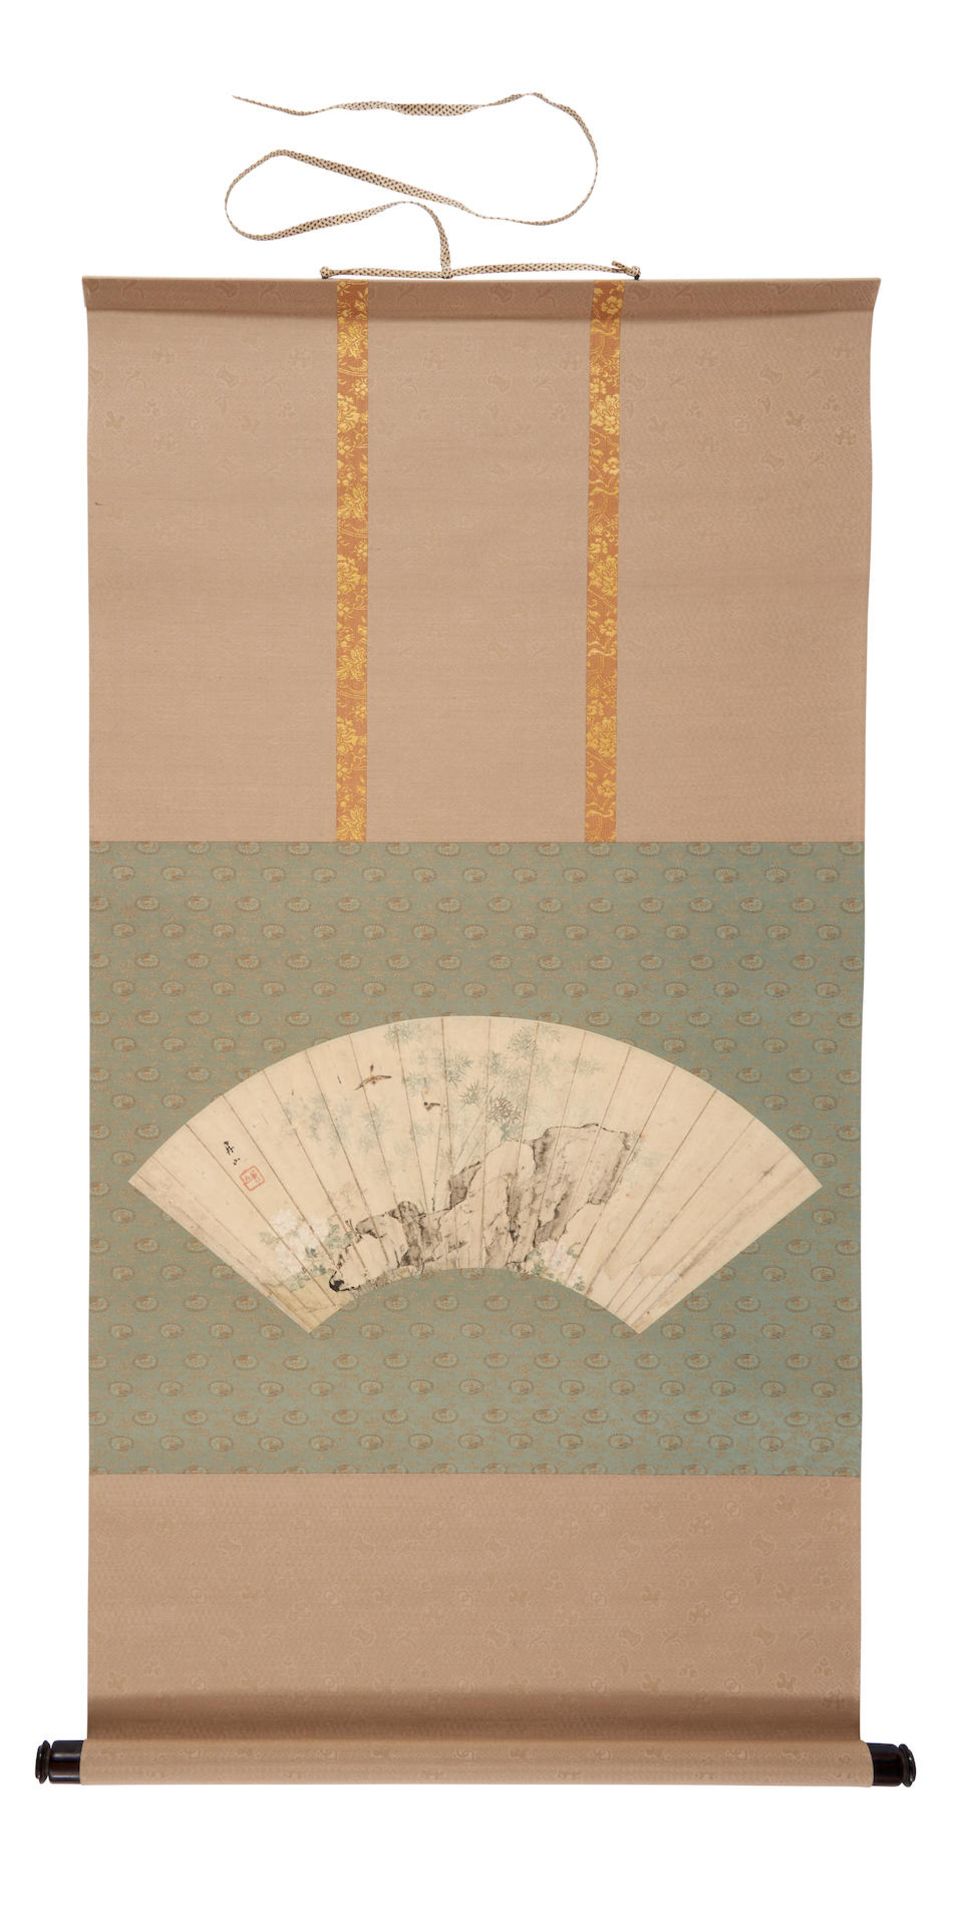 A HANGING SCROLL FAN PAINTING DEPICTING BAMBOO